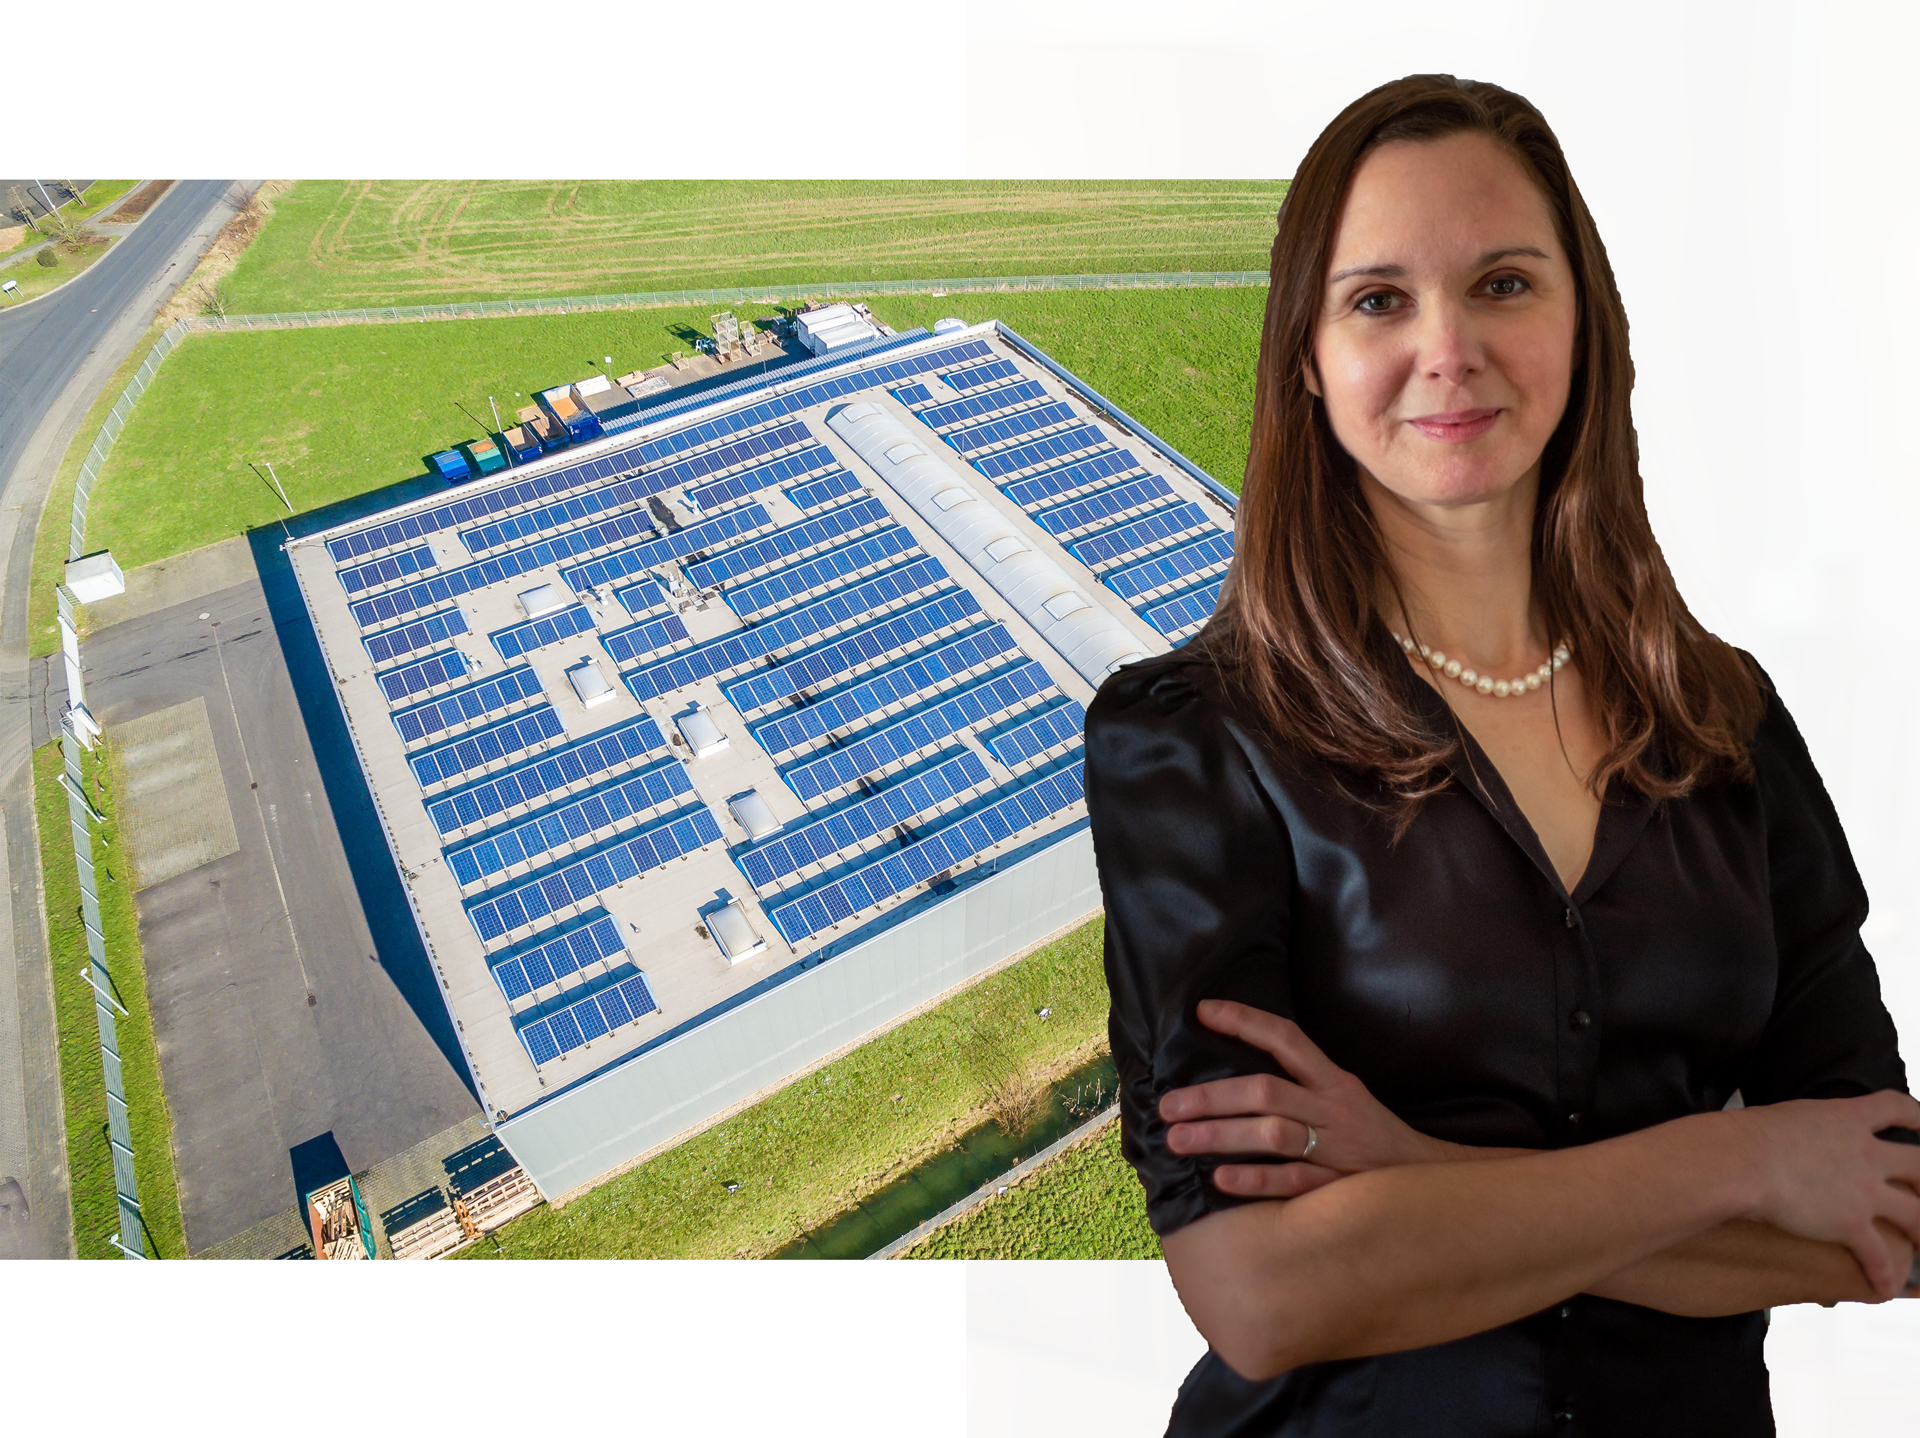 Heather Moore is the Technical Director for Sustainability at LRQA